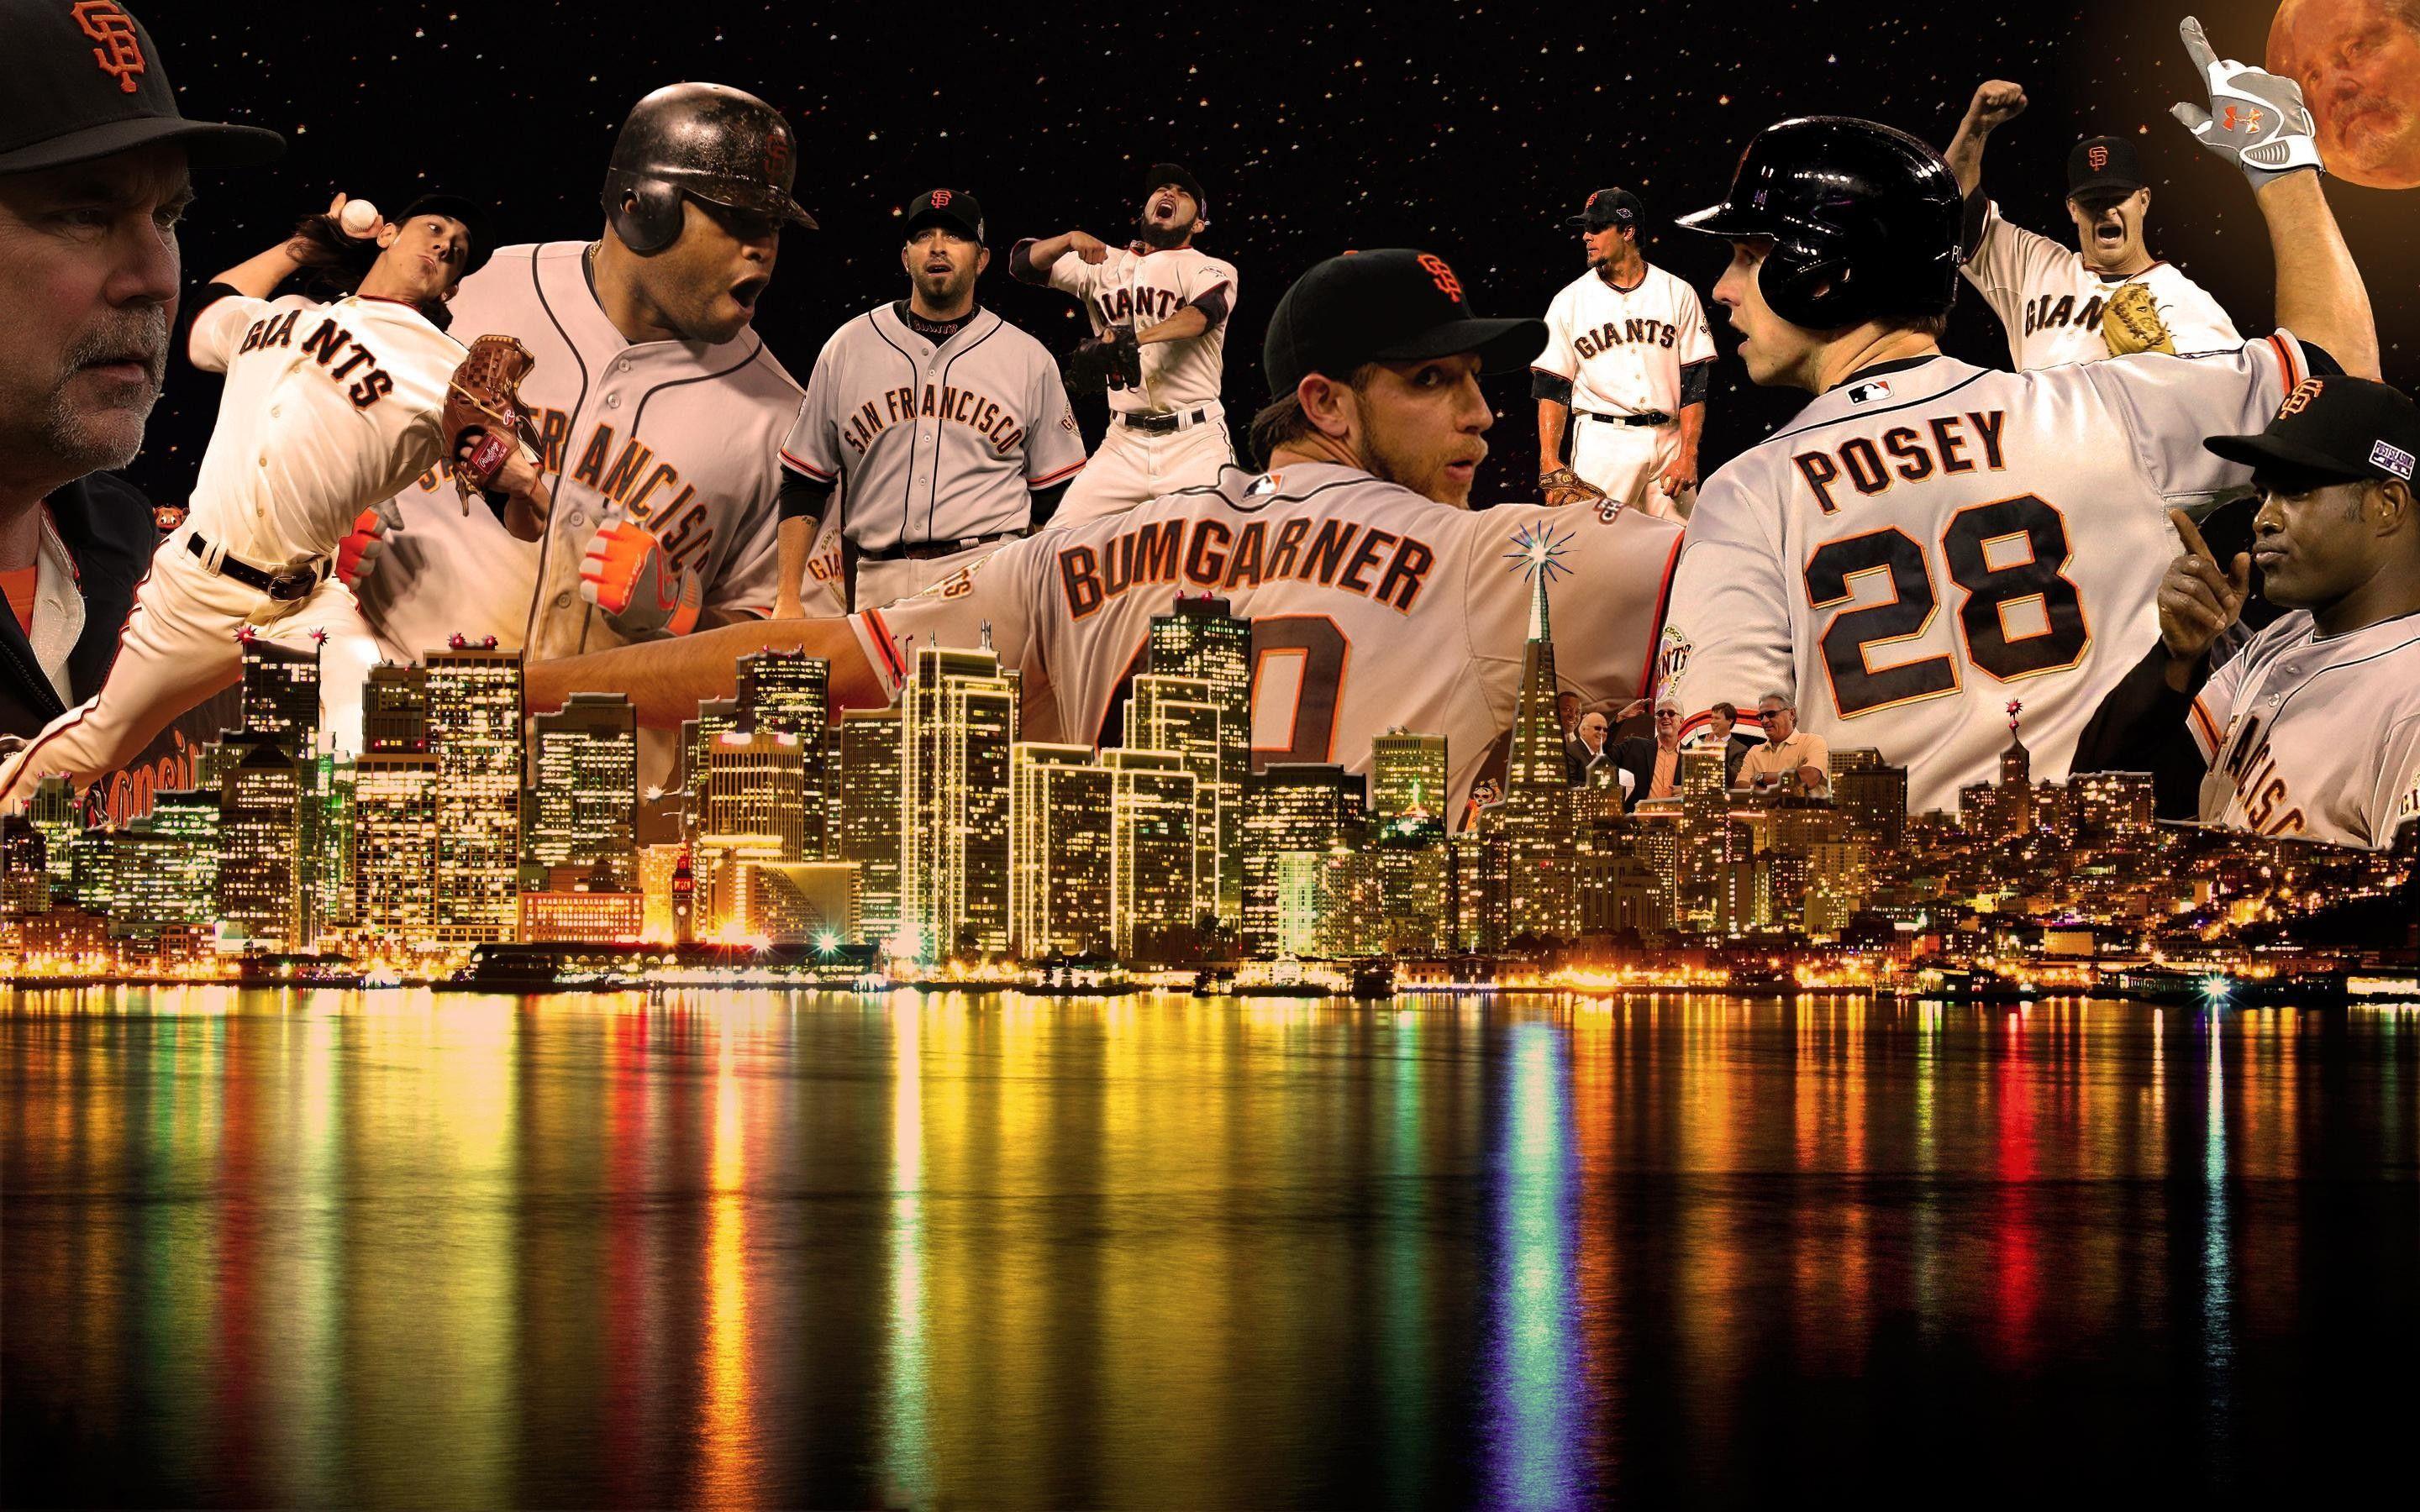 84 Buster Posey Images, Stock Photos & Vectors